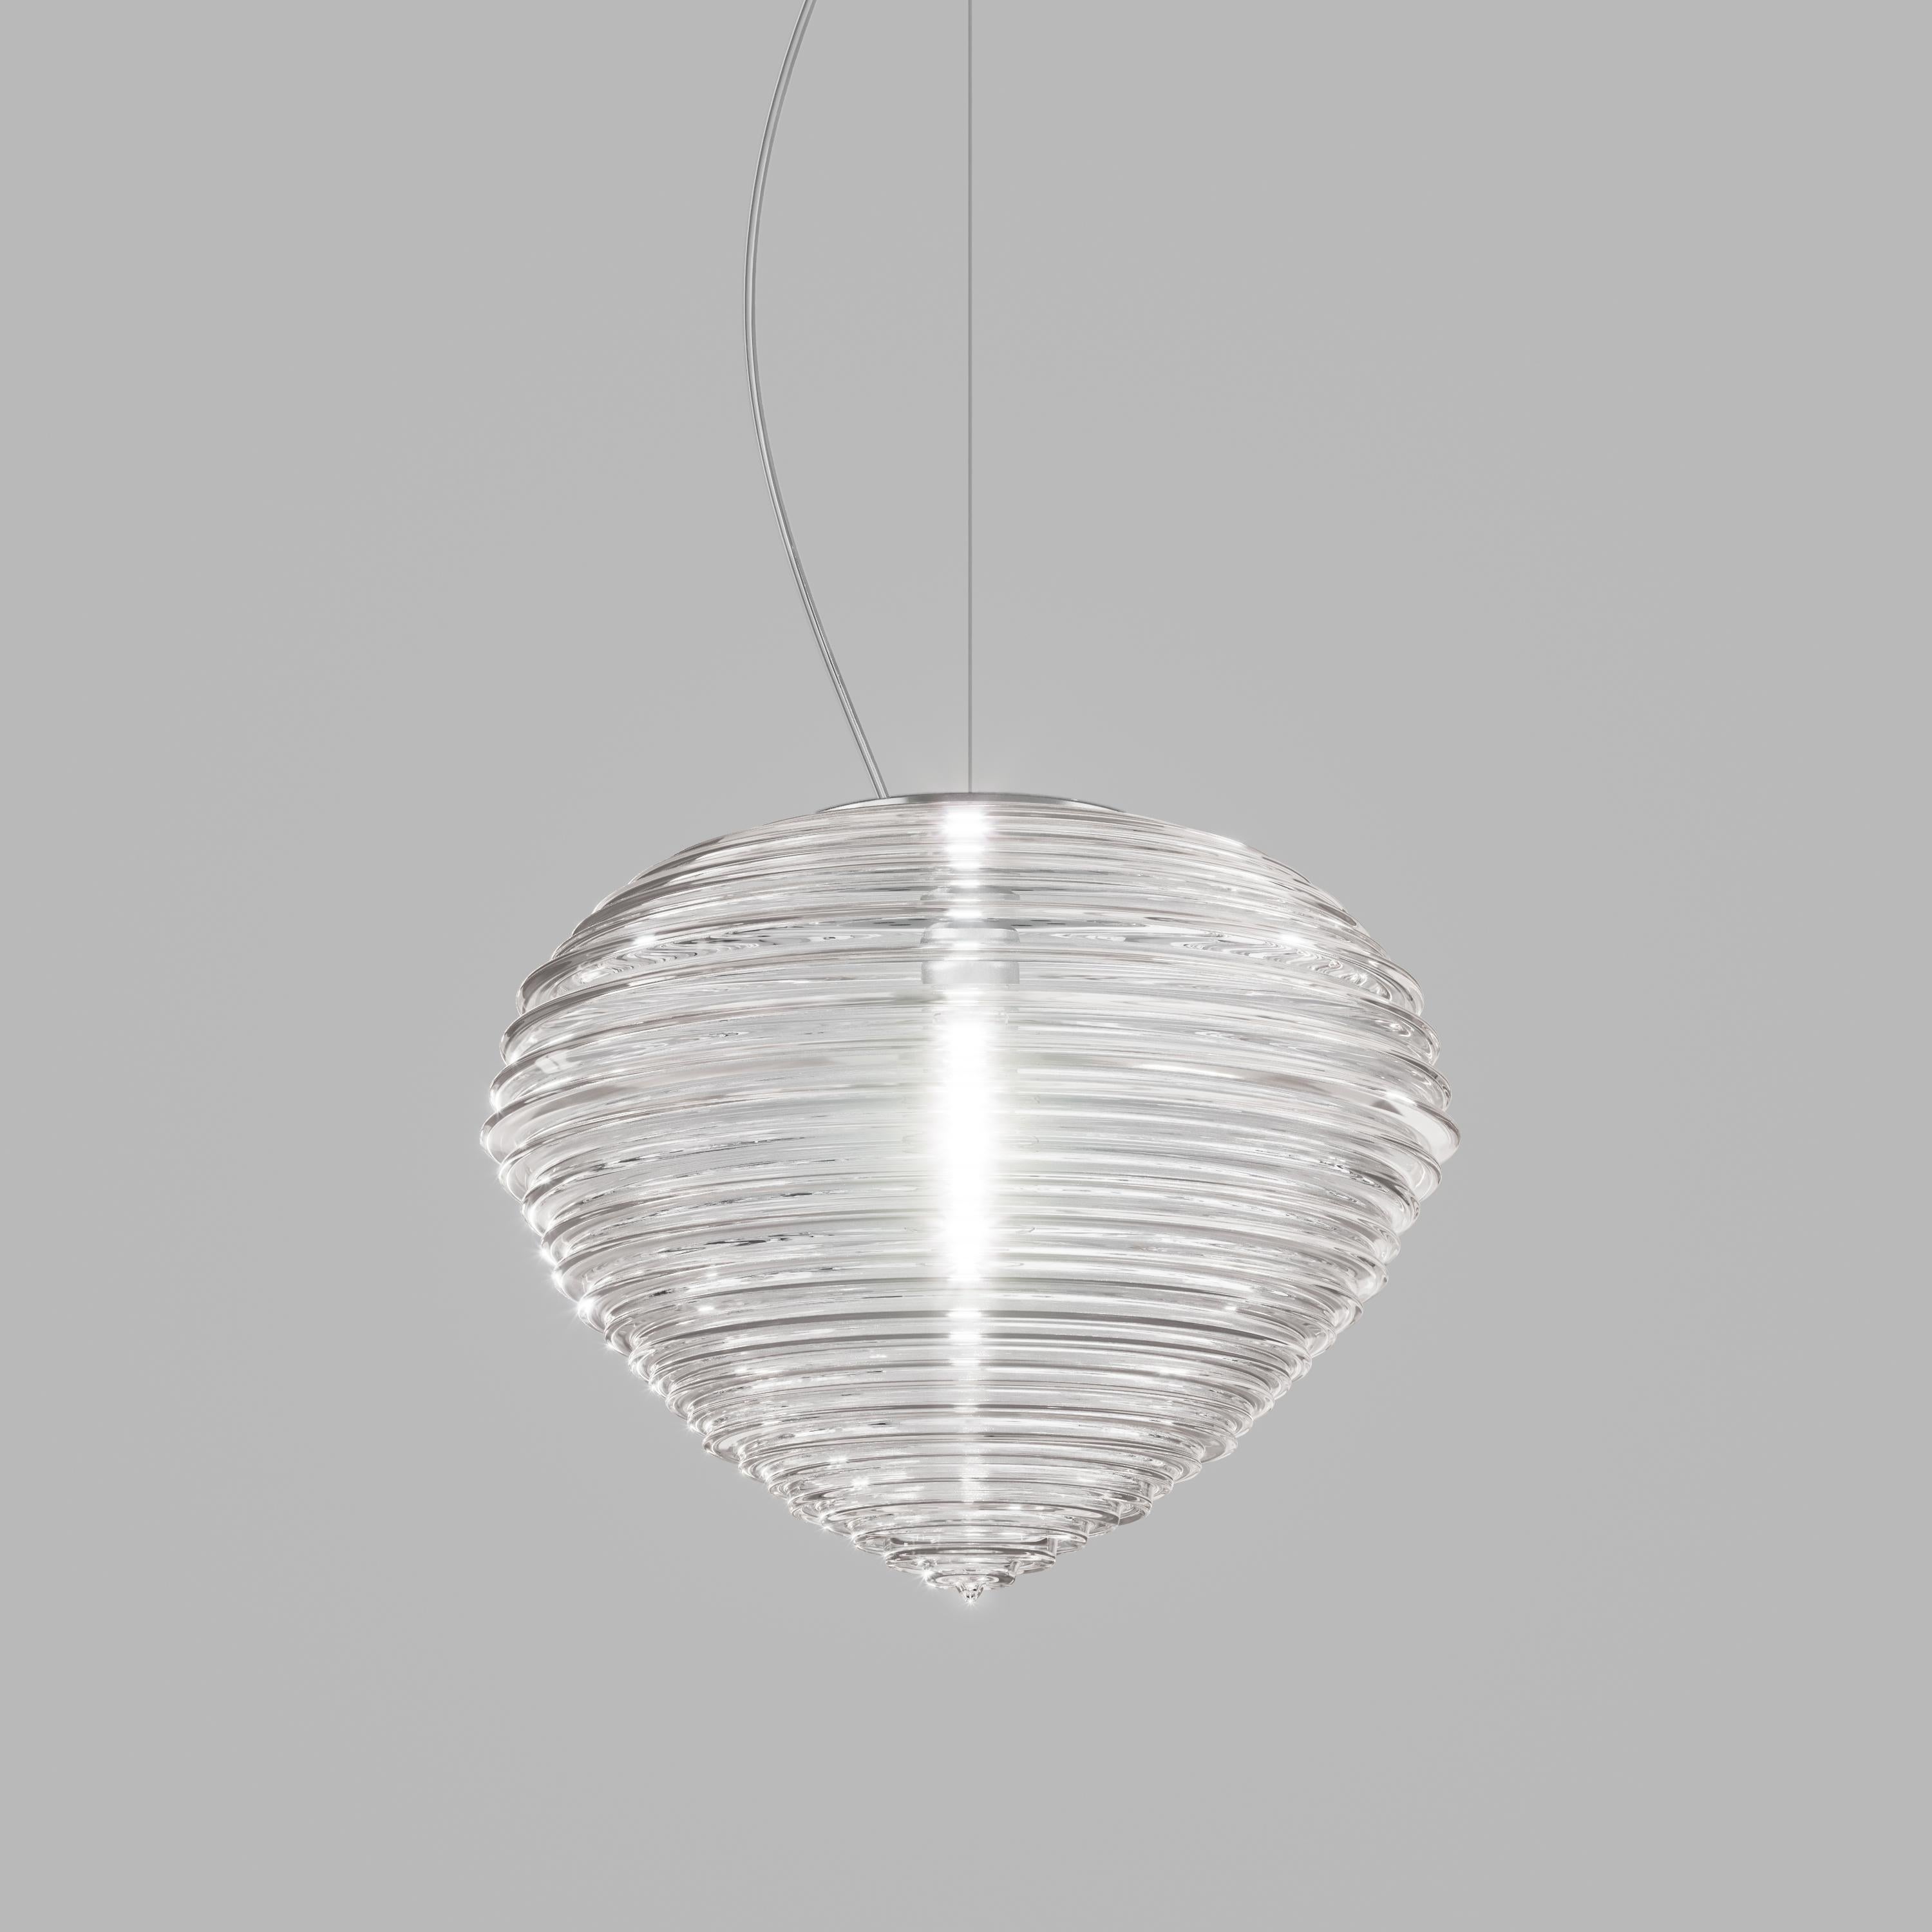 Sprit has the shape of a diamond blown into glass. Its folds are the result of a long process of development that creates a unique light reflection,  while keeping the source of light hidden even in the transparent crystal